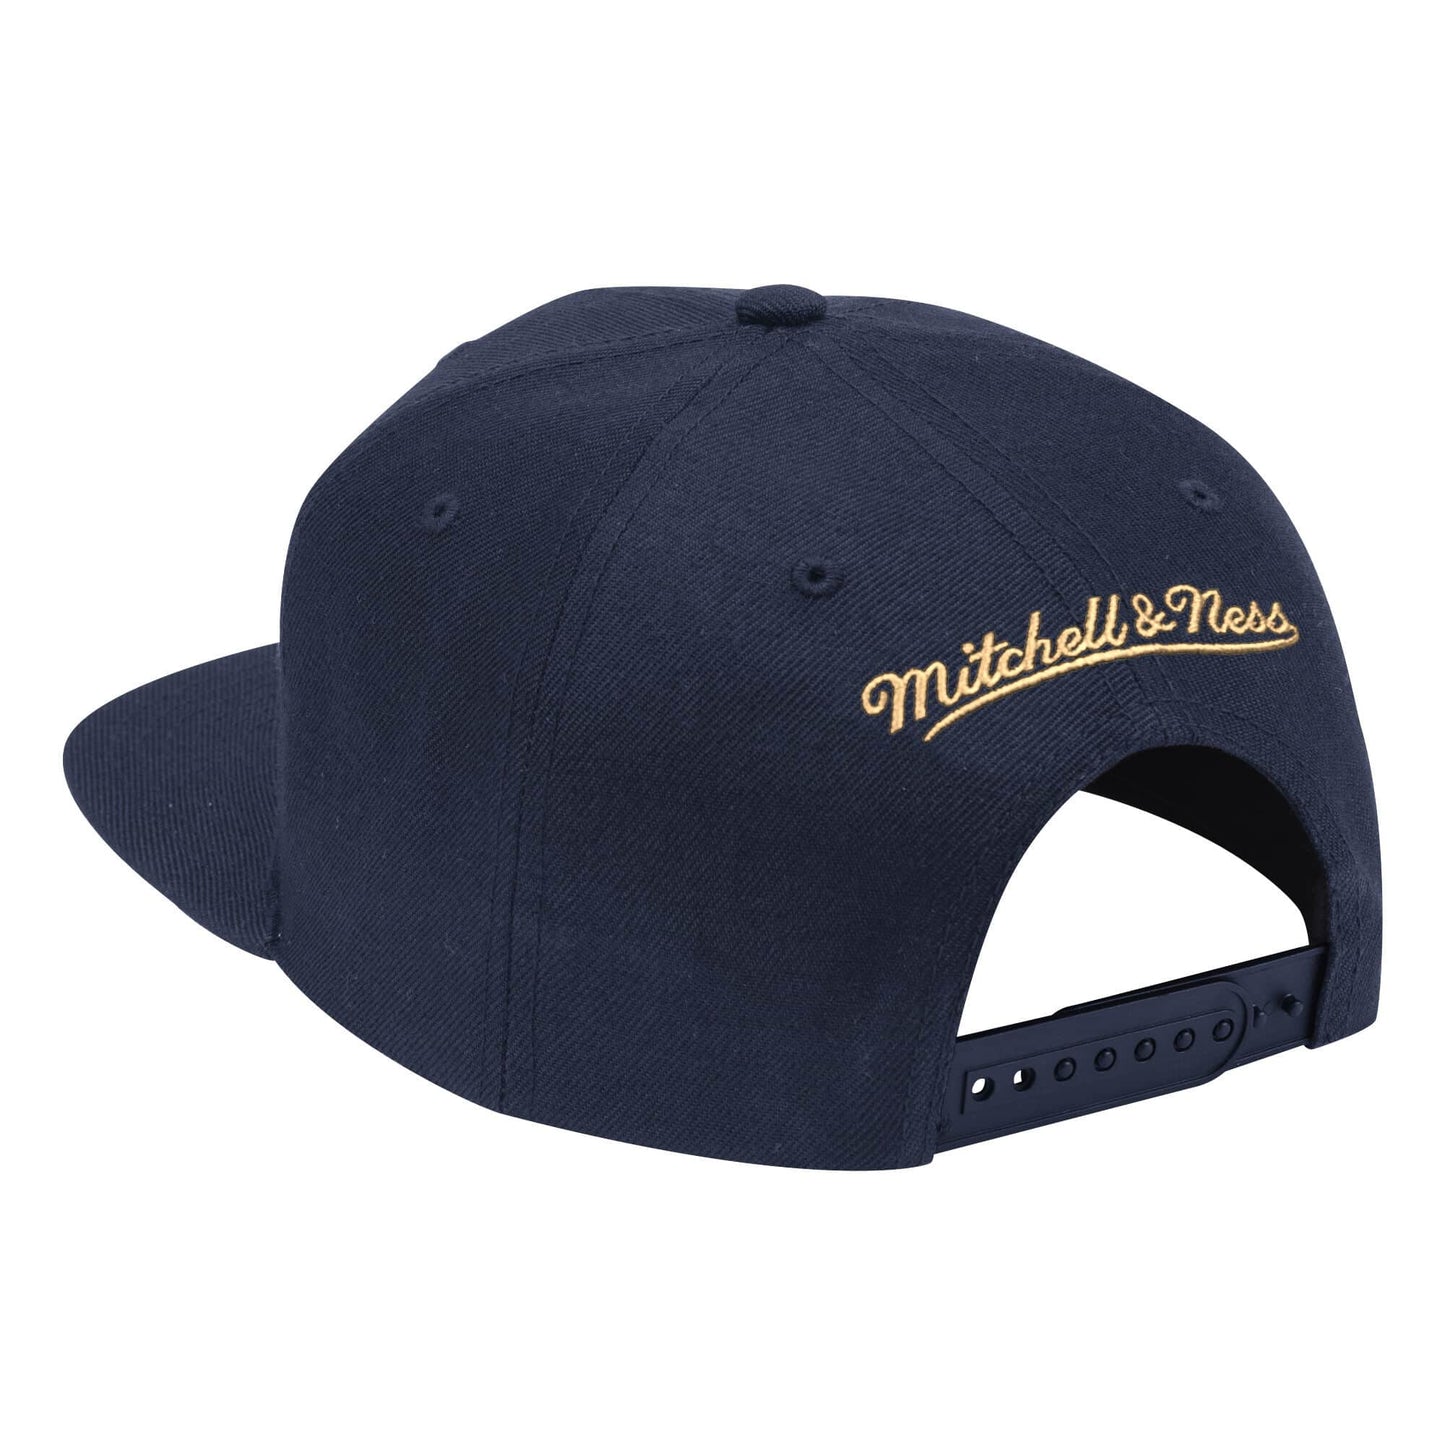 Mens NBA New Orleans Pelicans Navy Team Ground Snapback Hat By Mitchell And Ness